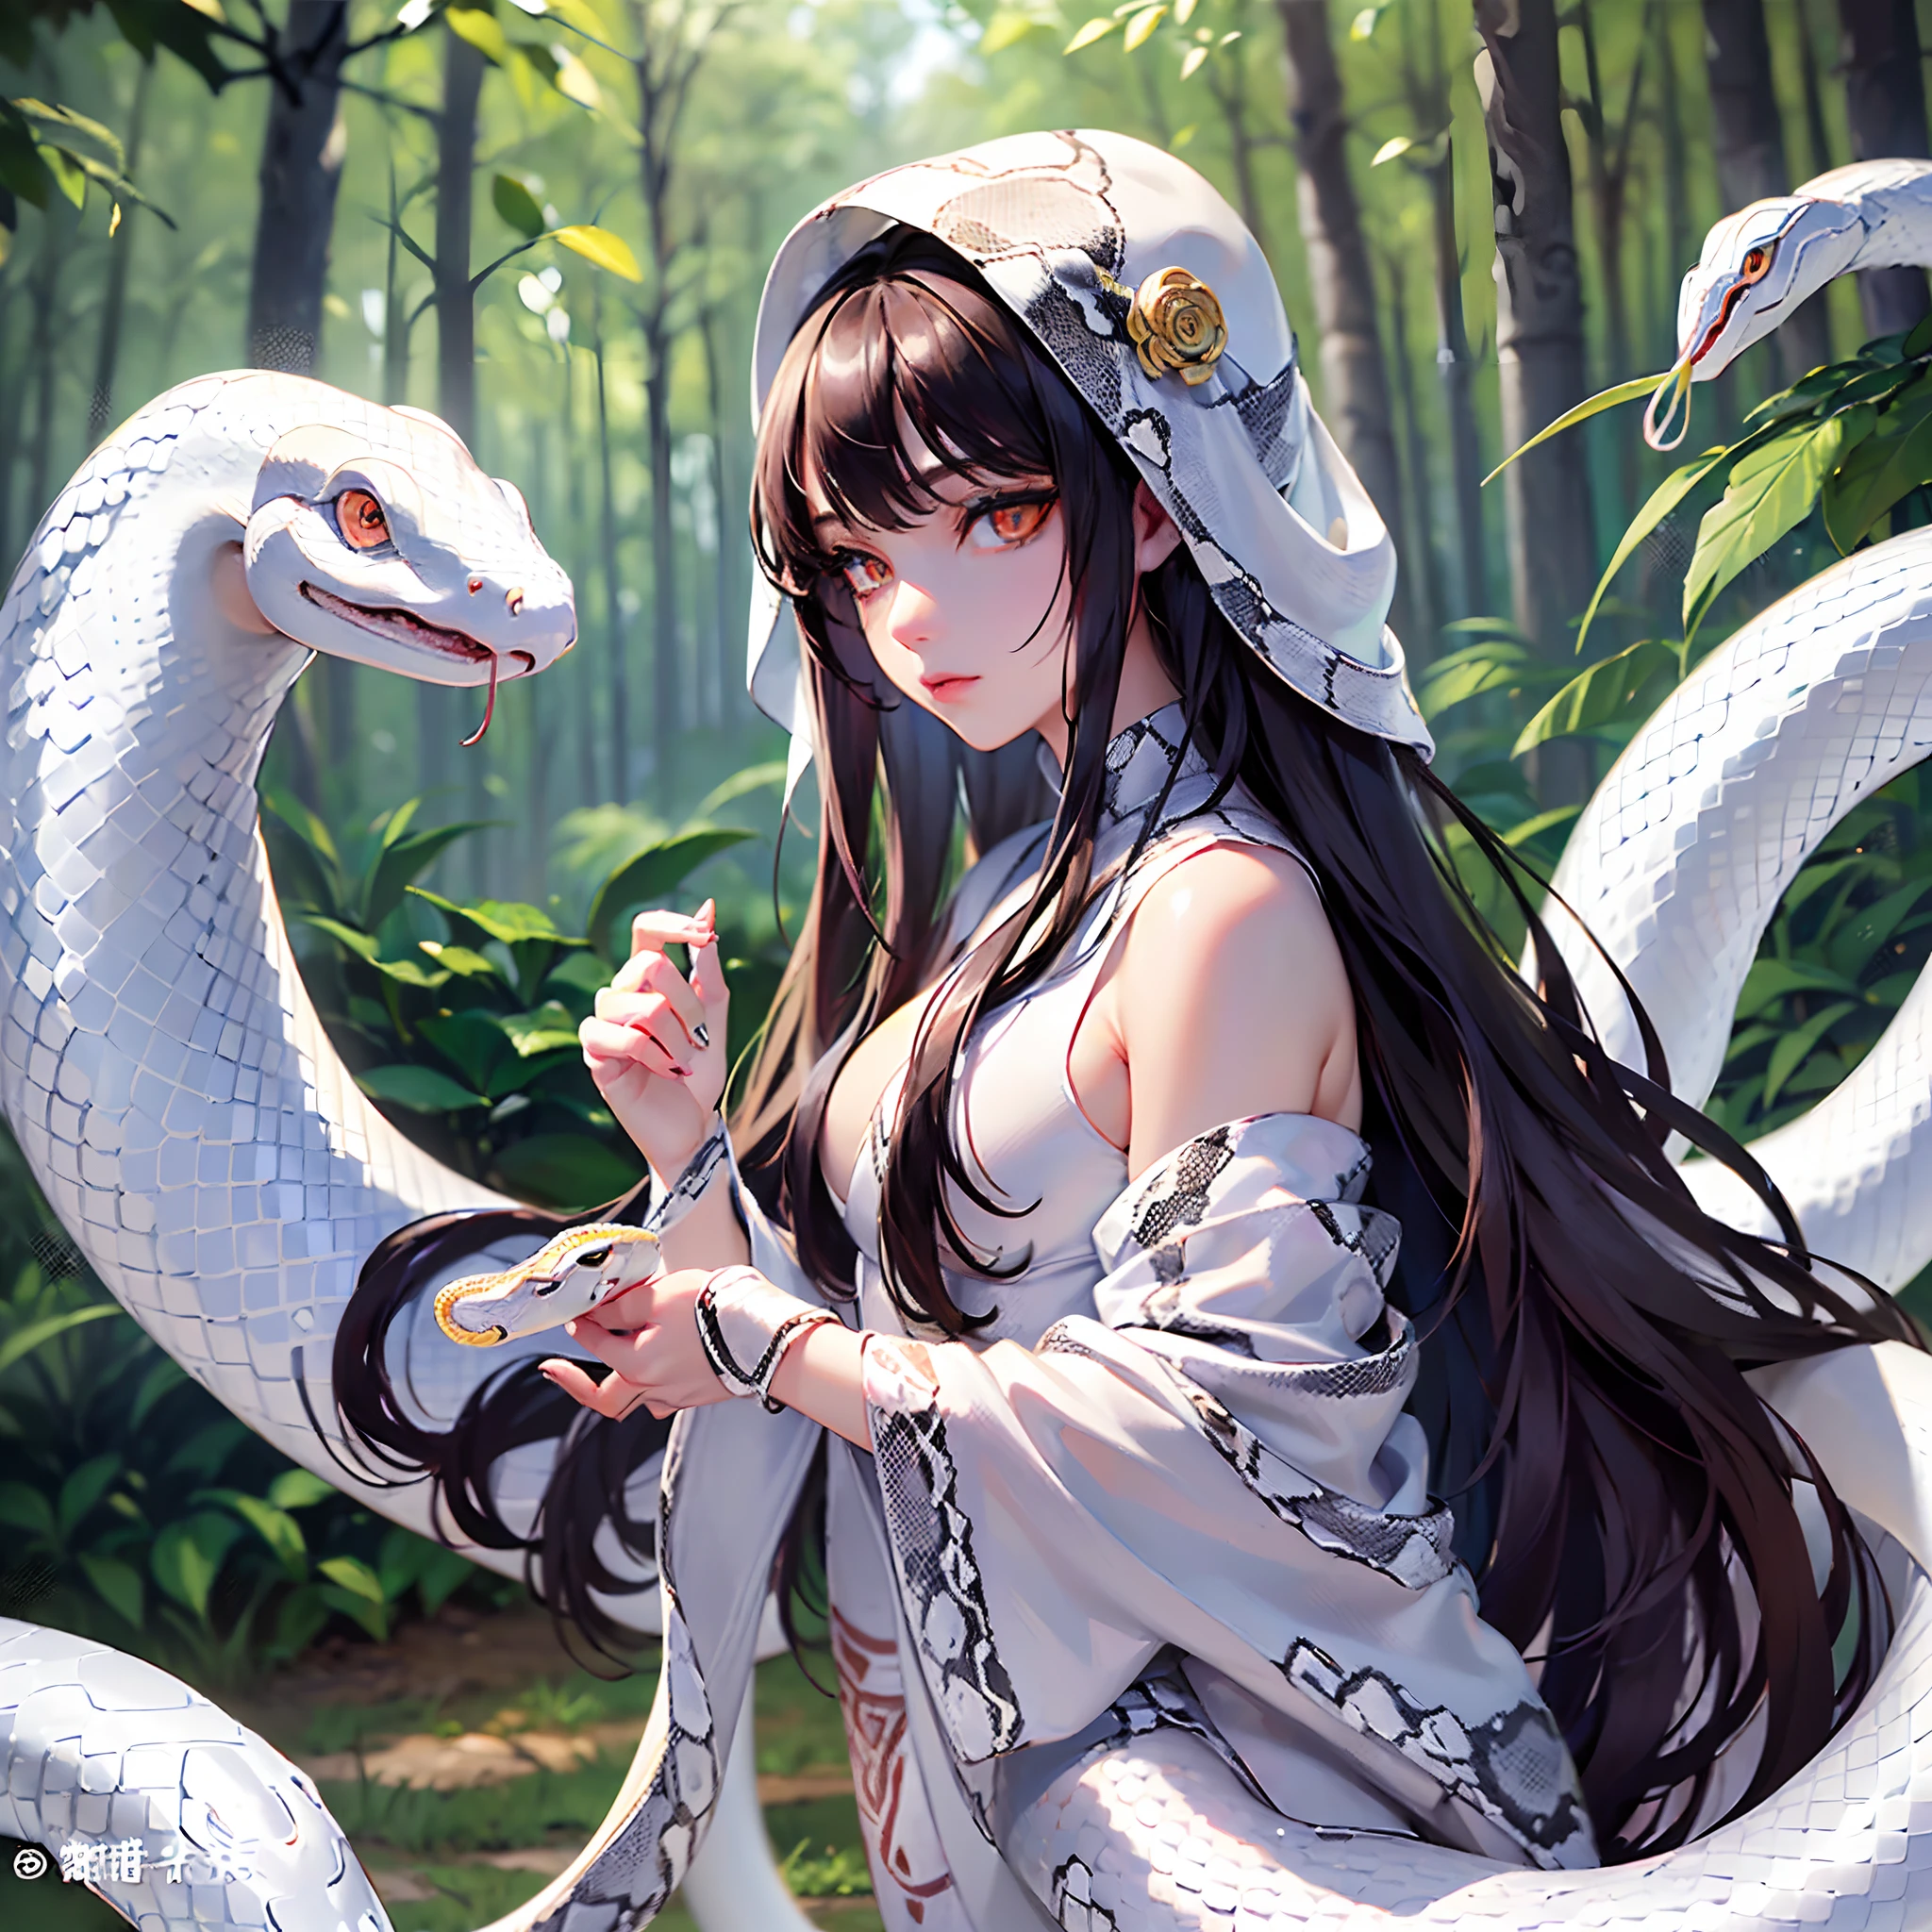 ((Finest quality)),(超A high resolution),(Ultra-detail),(Meticulous portrayal),((Best CG)),(Finest works of art),Ultra-Precision Art,The art of astounding depiction, (White large snake:1.5),(One woman:1.5),(Clear crimson eyes:1.5),(Black straight long hair:1.5,),deadpan:1.3,(Body wrapped around a white snake:1.5),Plain white kimono:1.5, In the dense forest:1.5